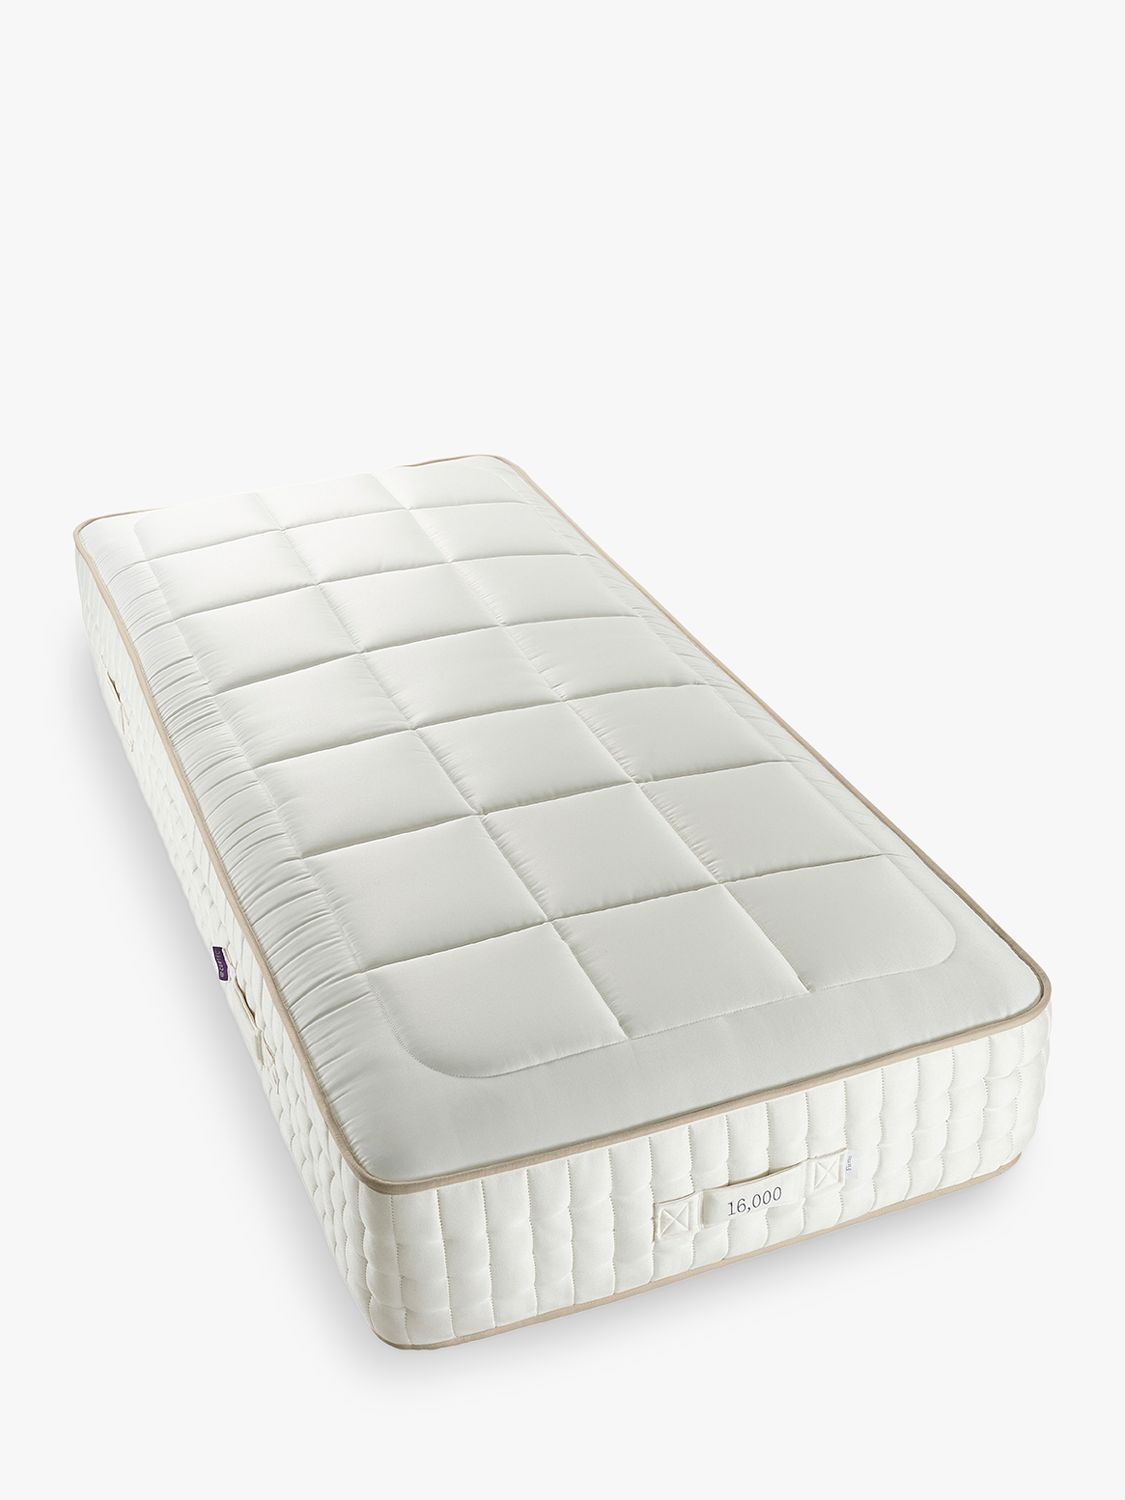 Photo of John lewis luxury natural collection mohair quilted 16000 single firmer tension pocket spring mattress